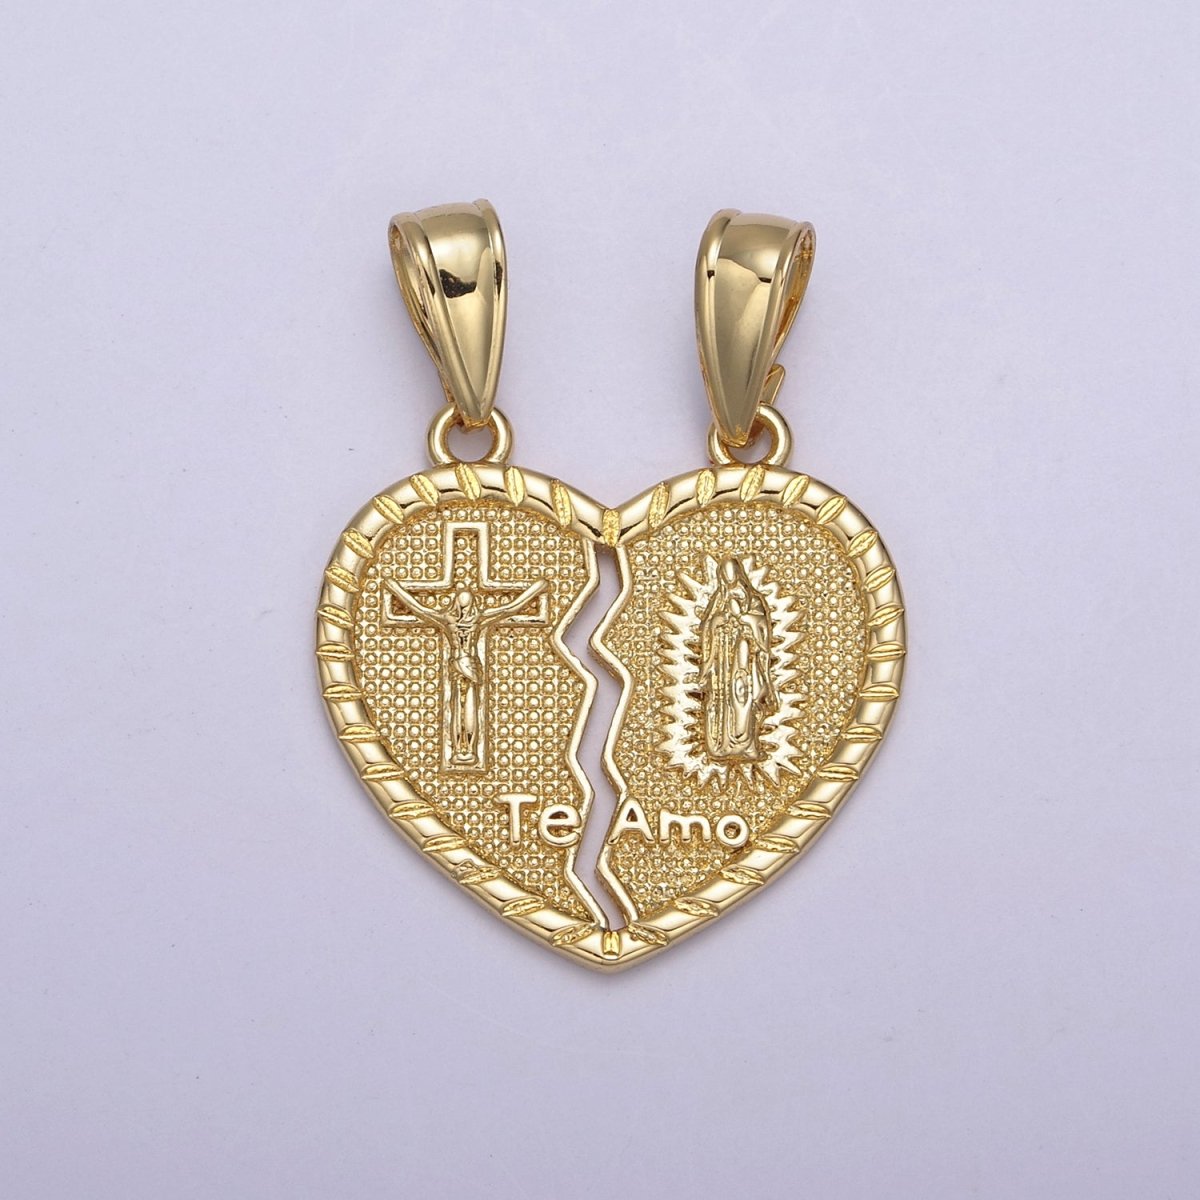 Breakable 24k Gold Filled Lady Guadalupe Jesus Heart Pendant, Gold Guadalupe, Gold Jesus, Te Amo Breakable Pendant H-865 - DLUXCA